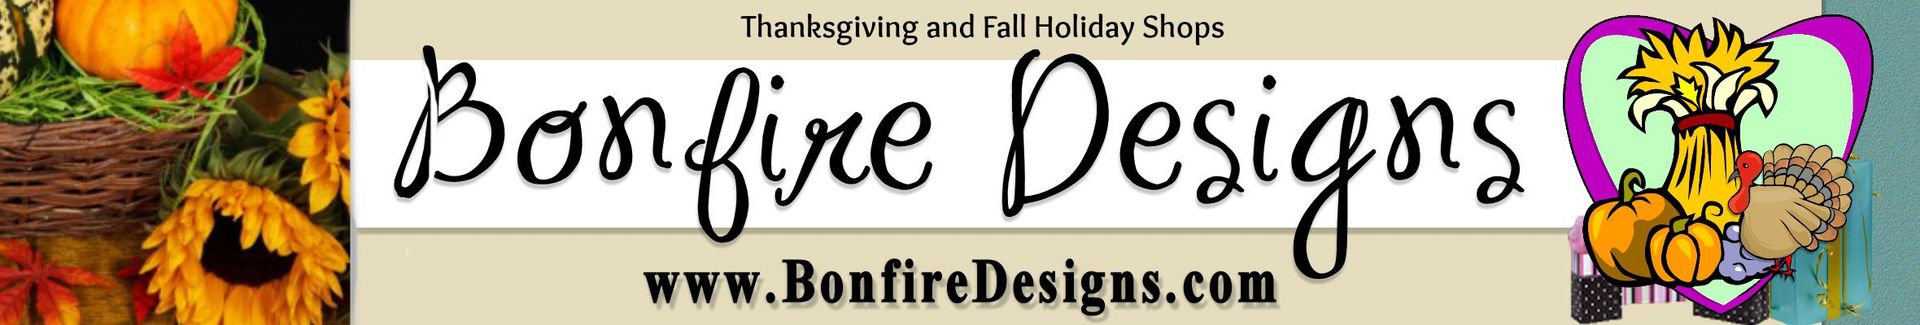 Thanksgiving Gifts and Home Decor